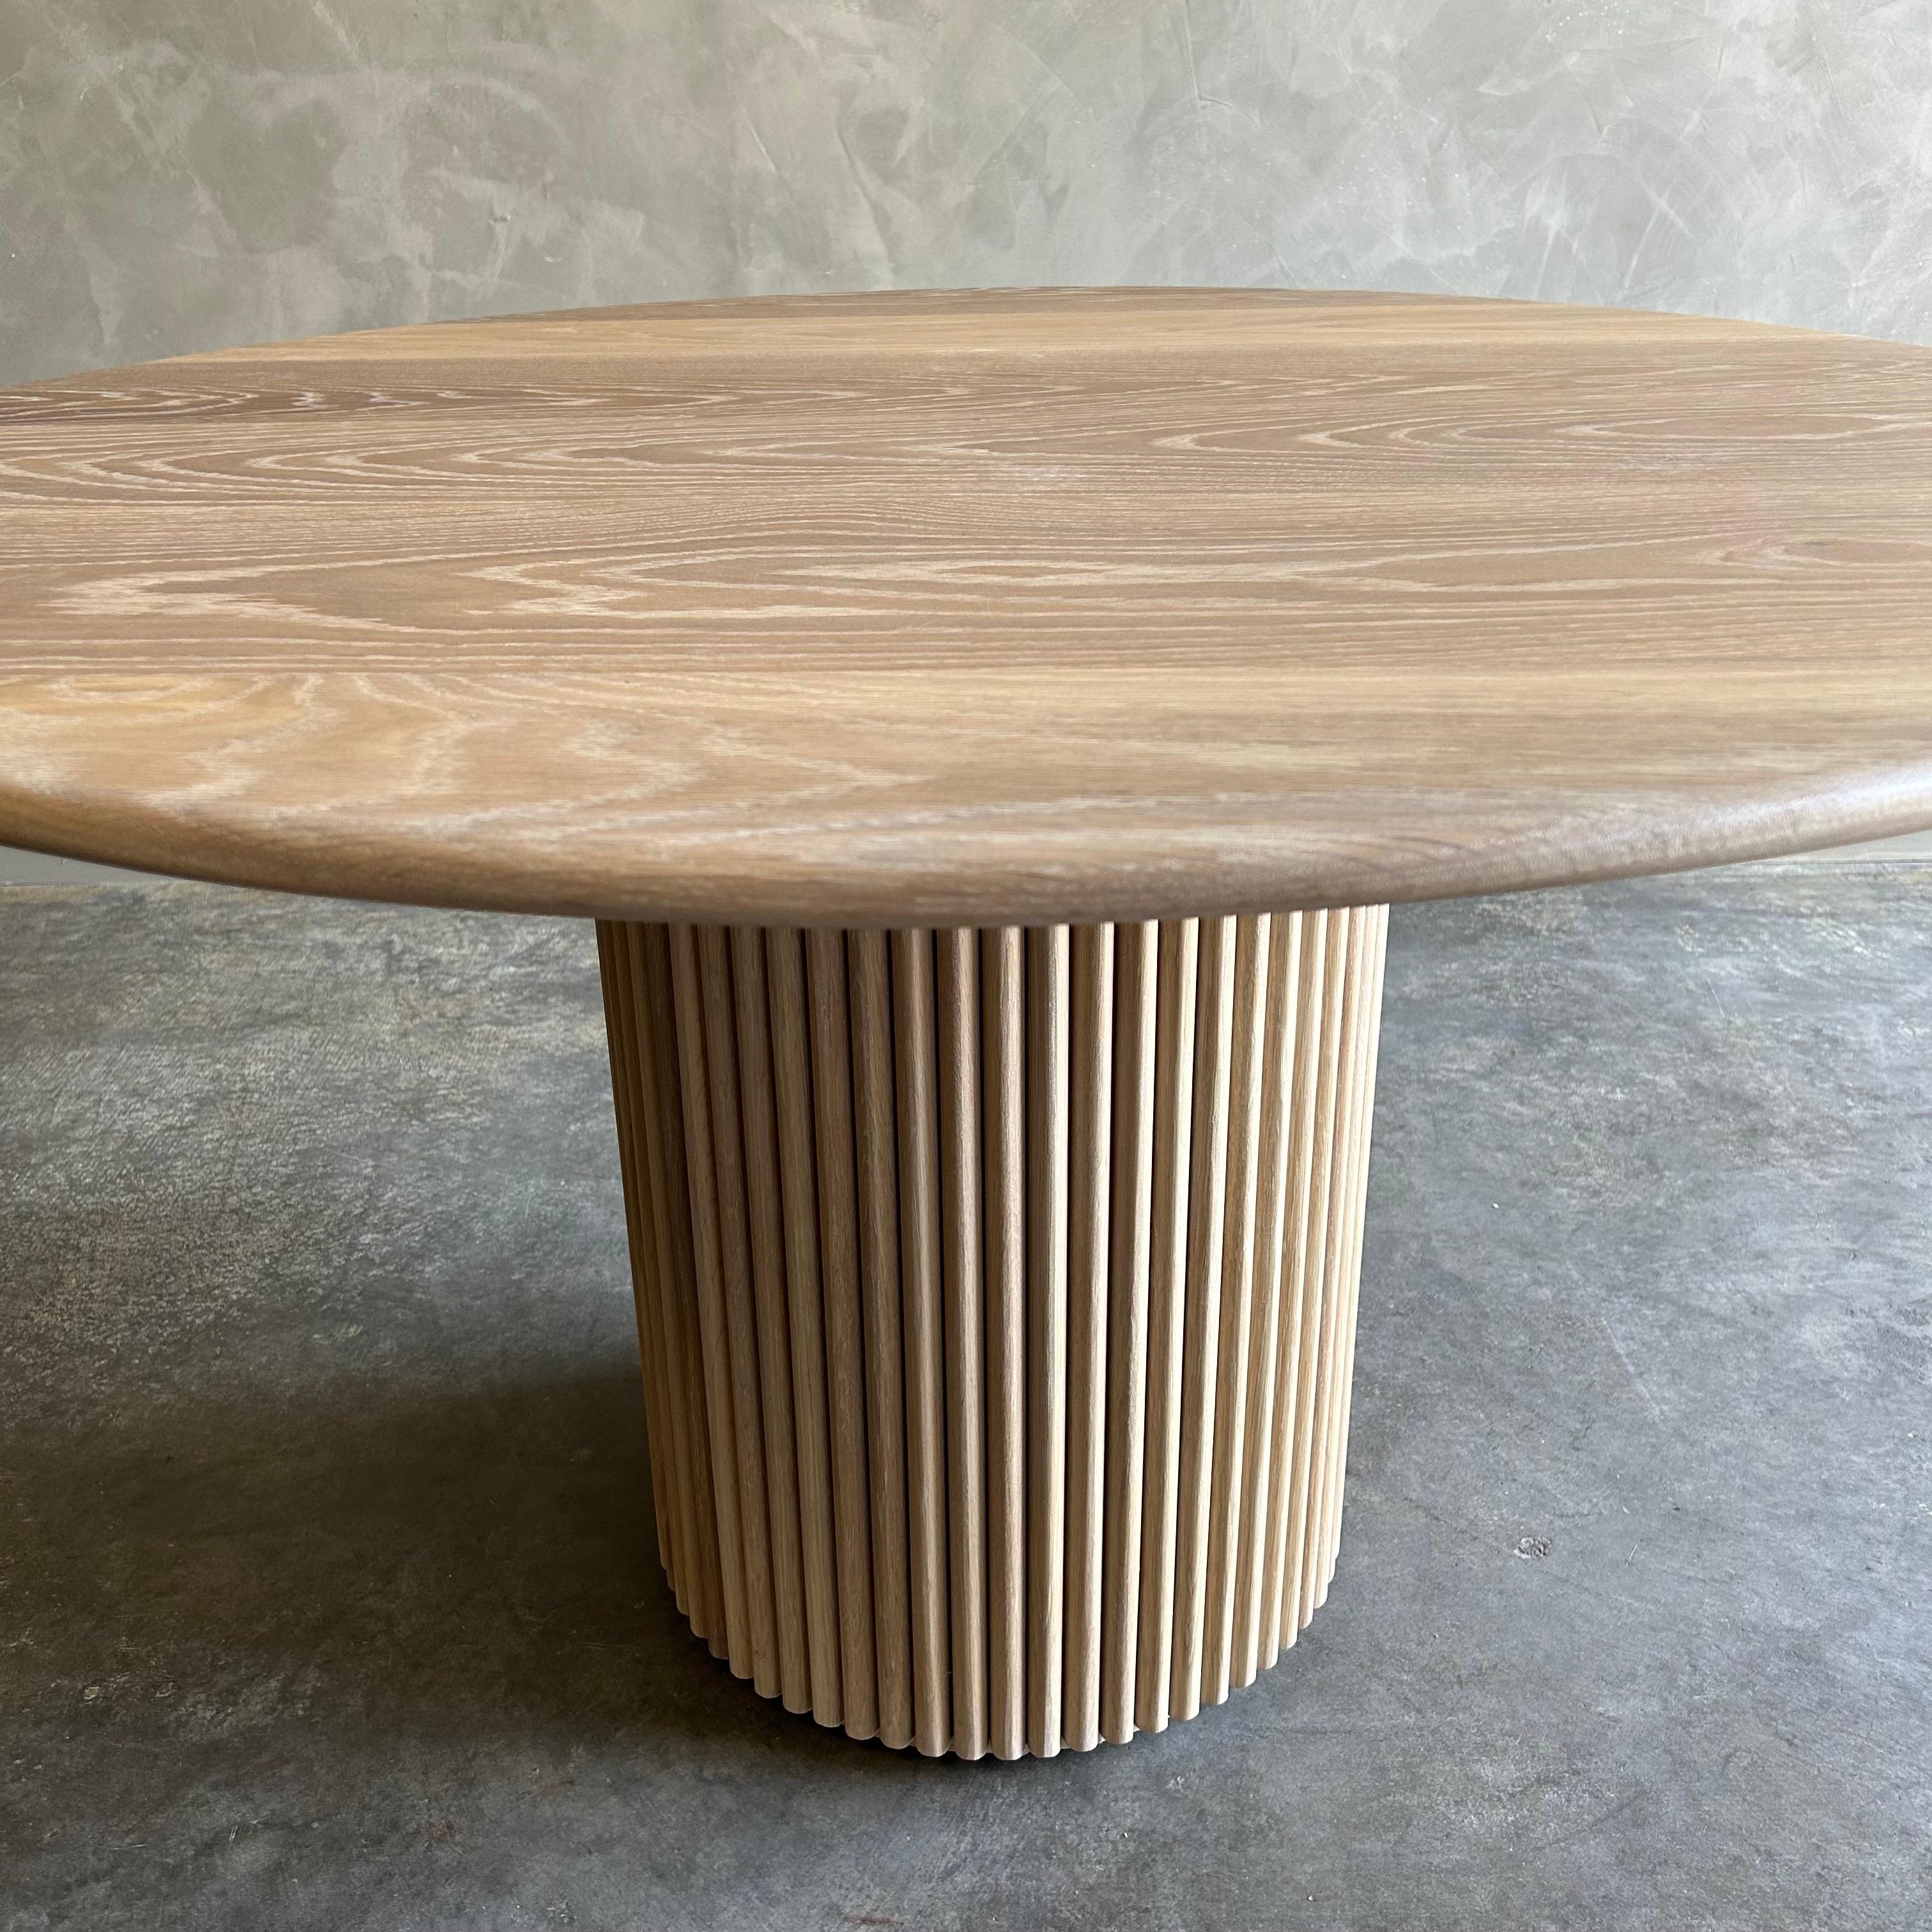 Custom White Oak Reeded Base Dining Table Entry In New Condition For Sale In Brea, CA